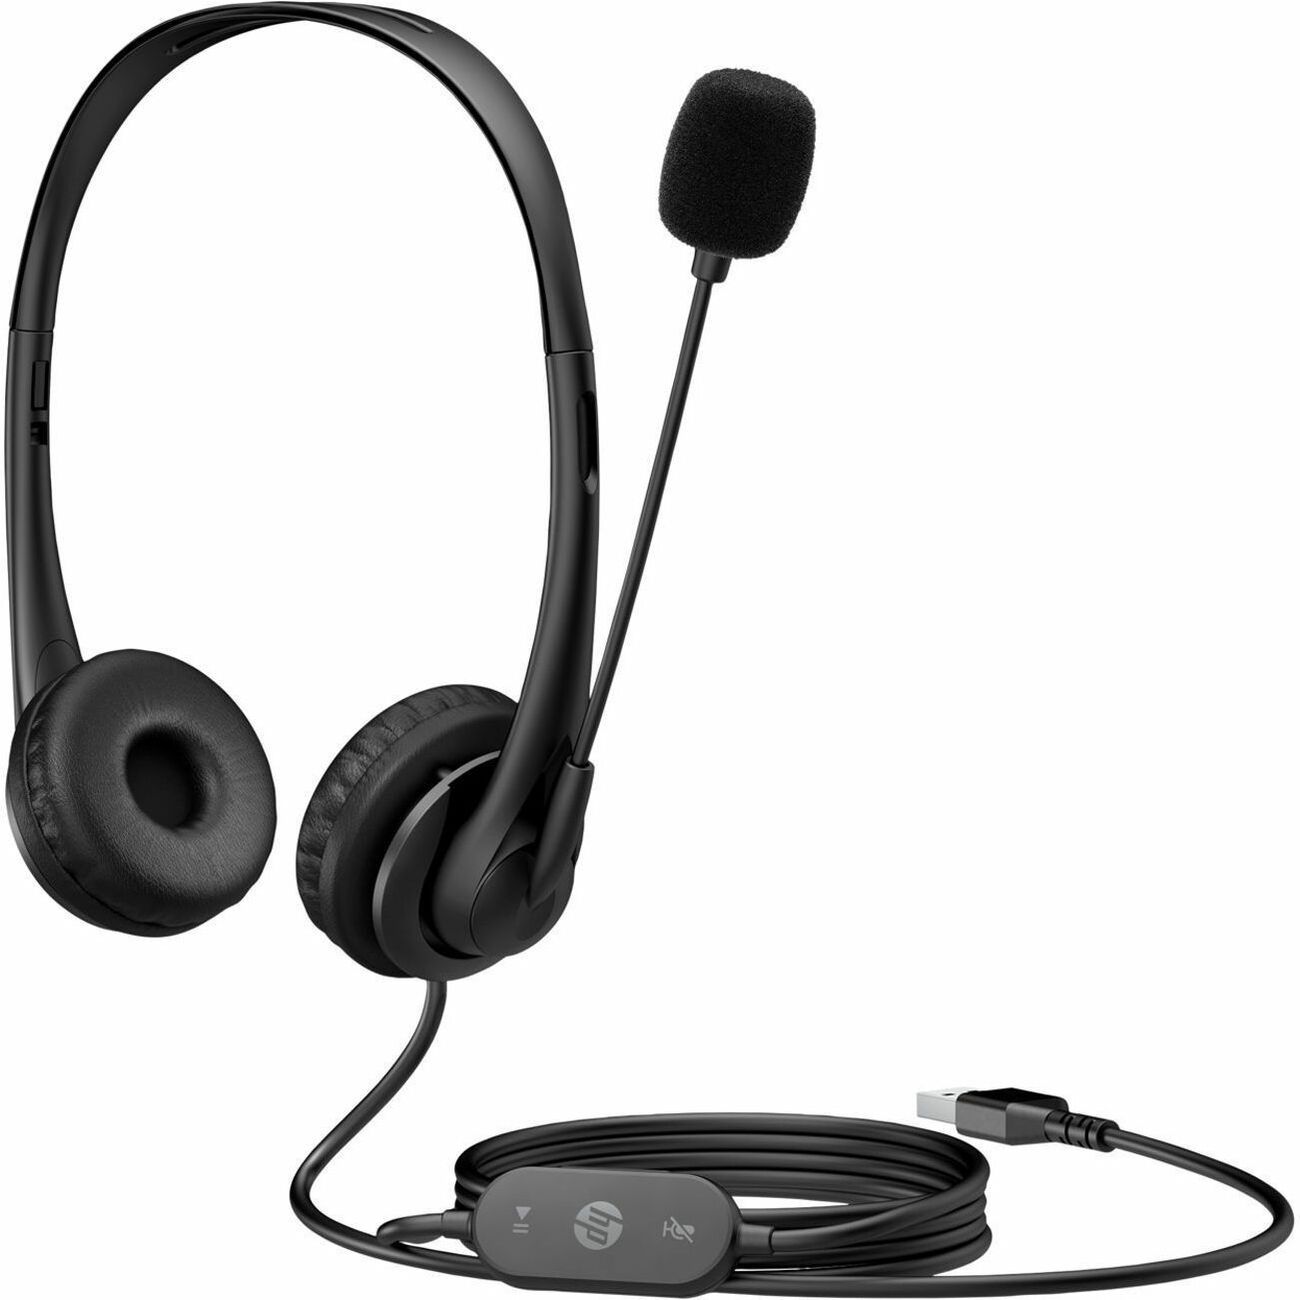 HP Stereo USB Headset G2 (428H5AA#ABL) - image 2 of 6